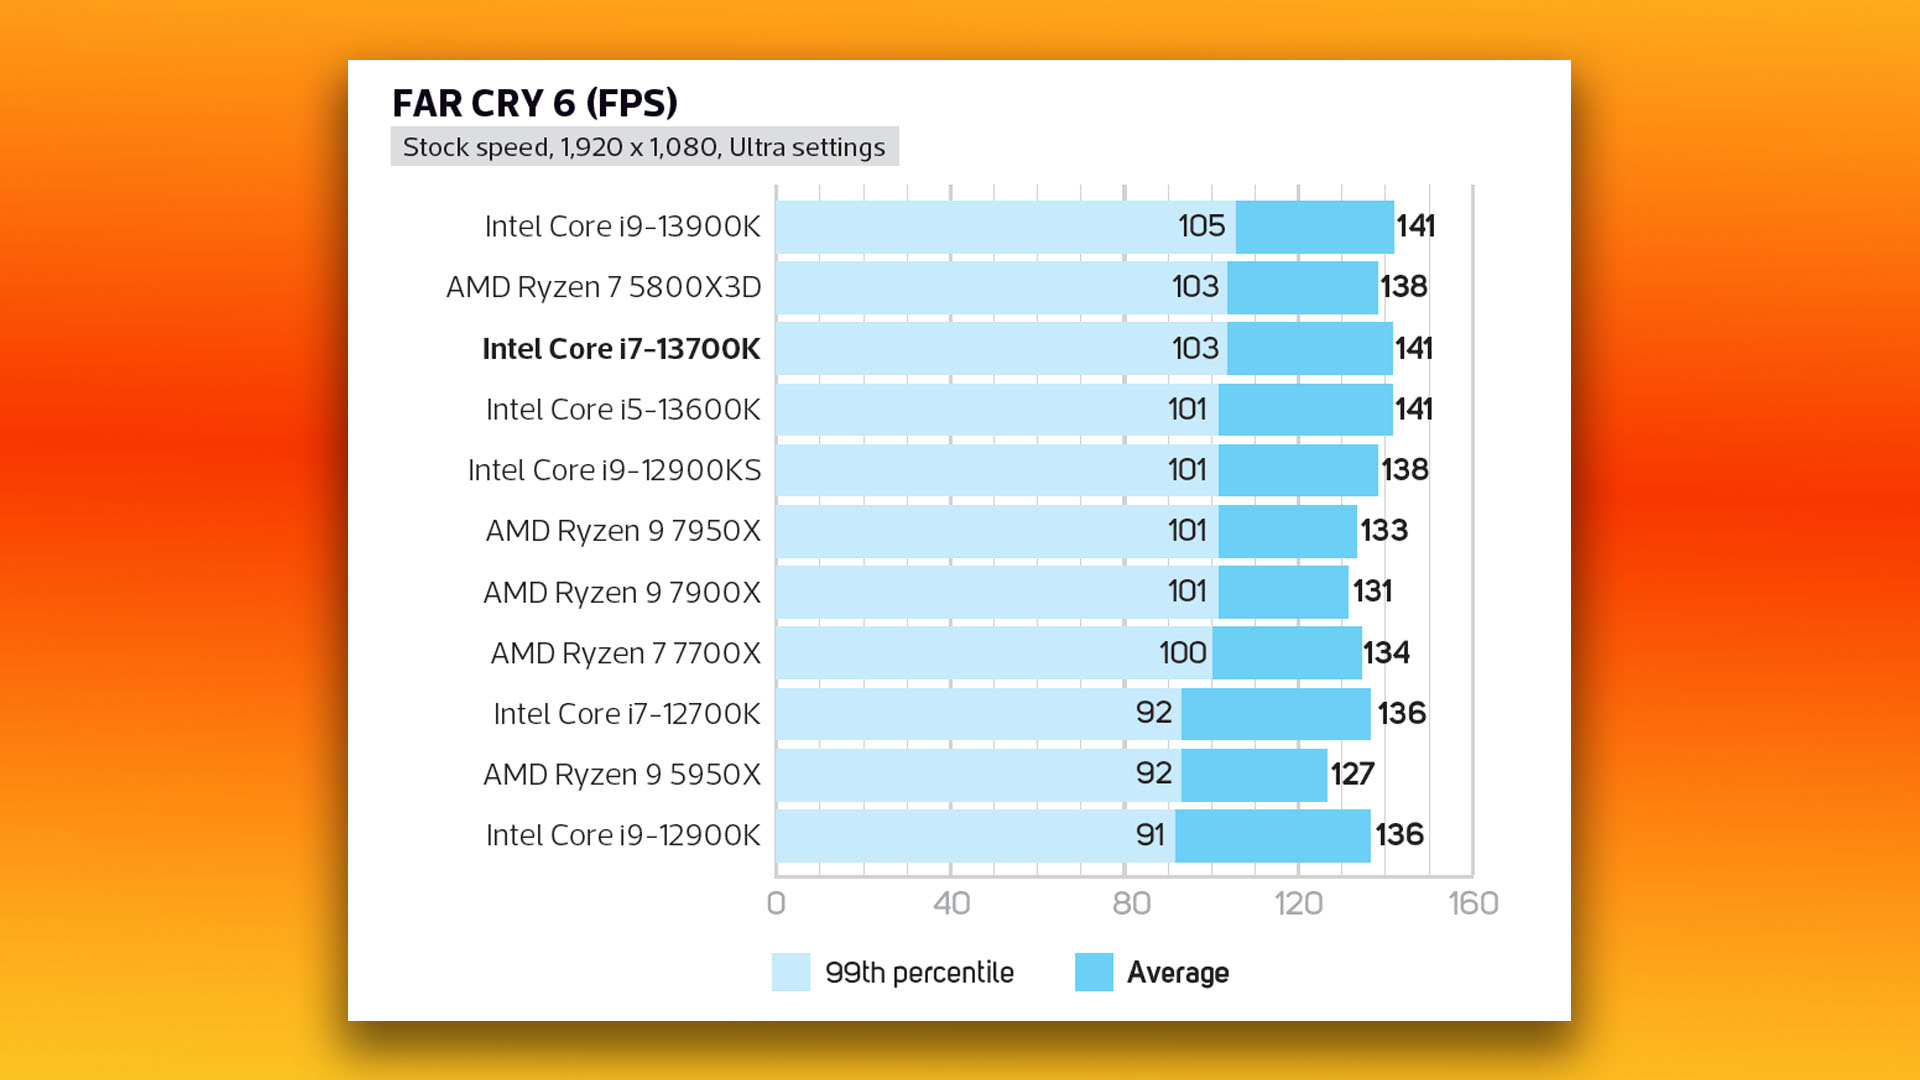 Intel Core i7 13700K review: Far Cry 6 gaming benchmark at stock speed